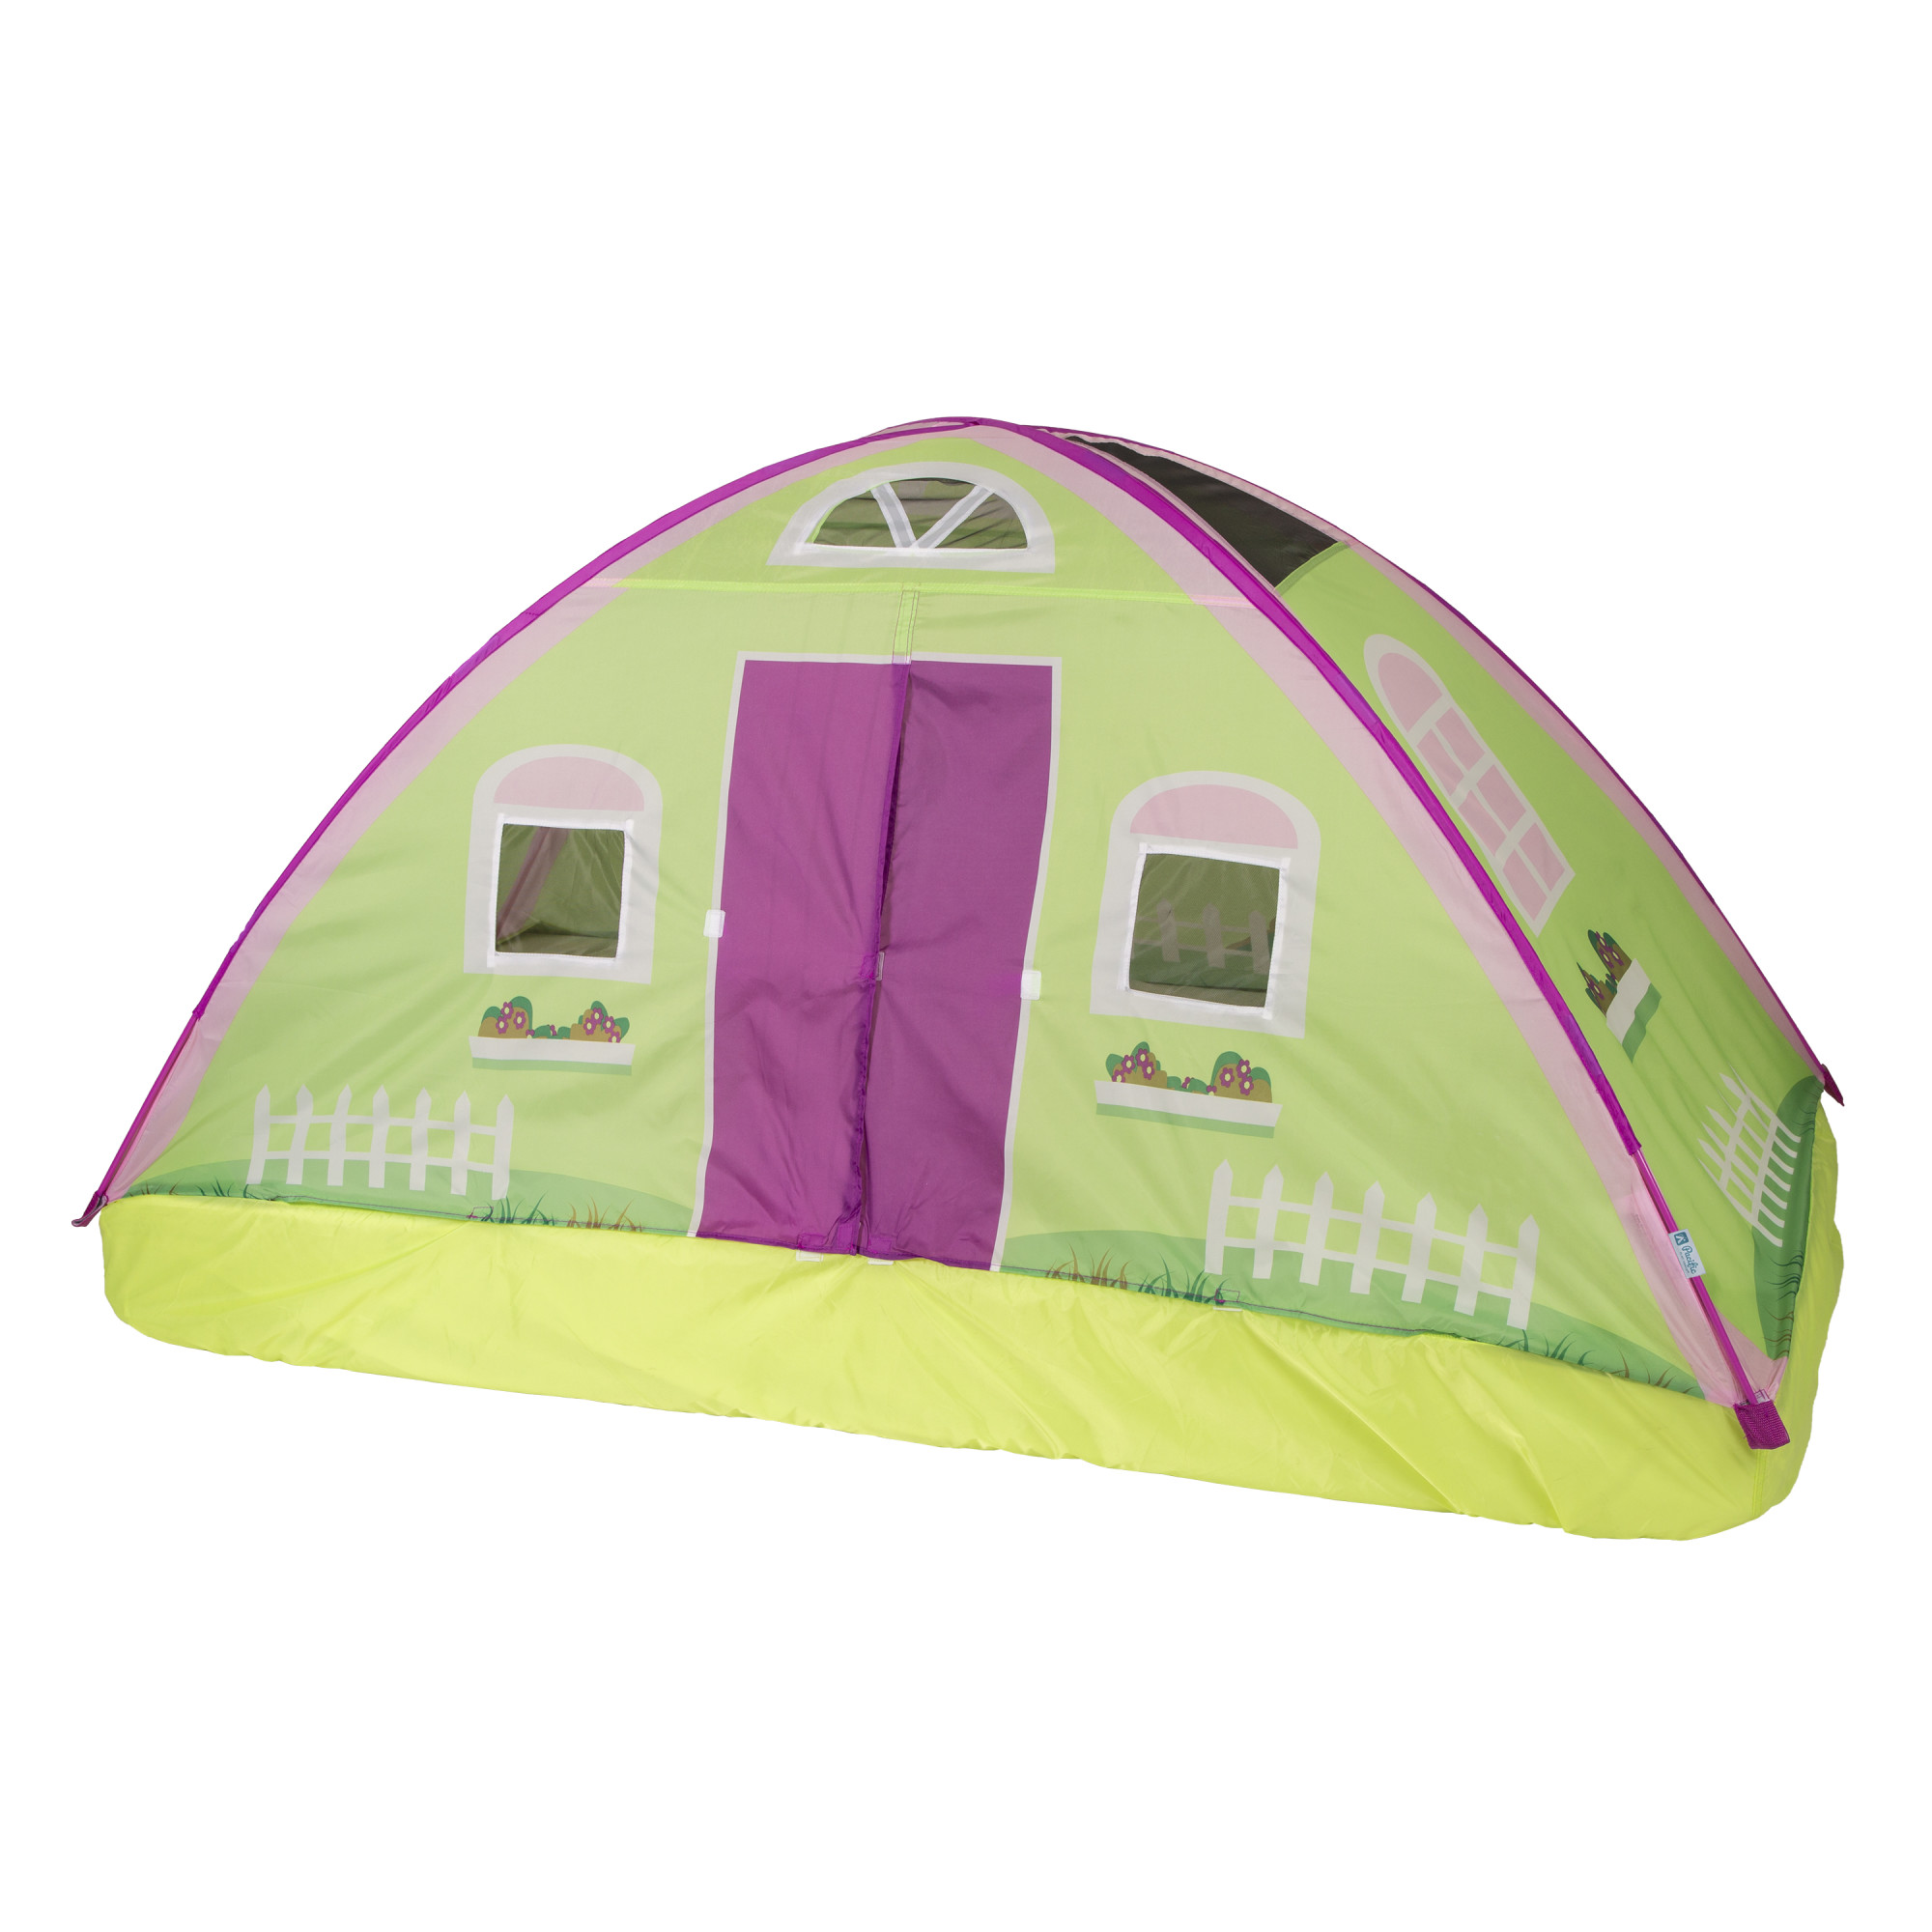 Pacific Play Tents Cottage Bed Tent, Twin - image 1 of 17